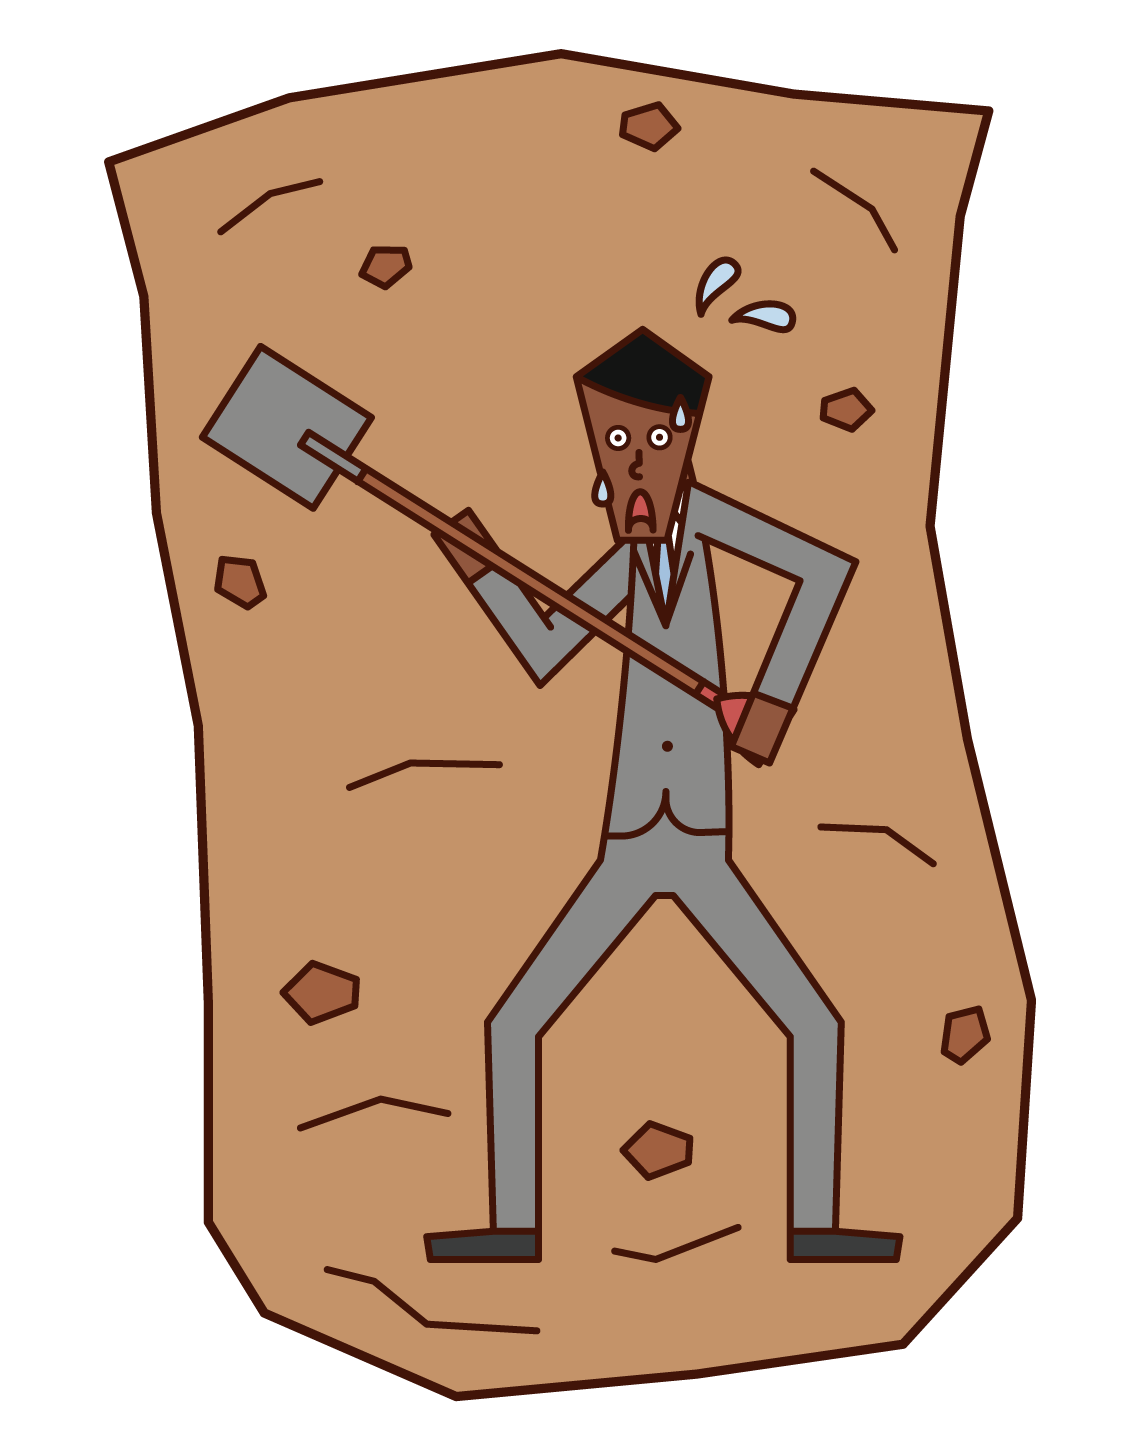 Illustration of a man digging a hole in search of a gold vein